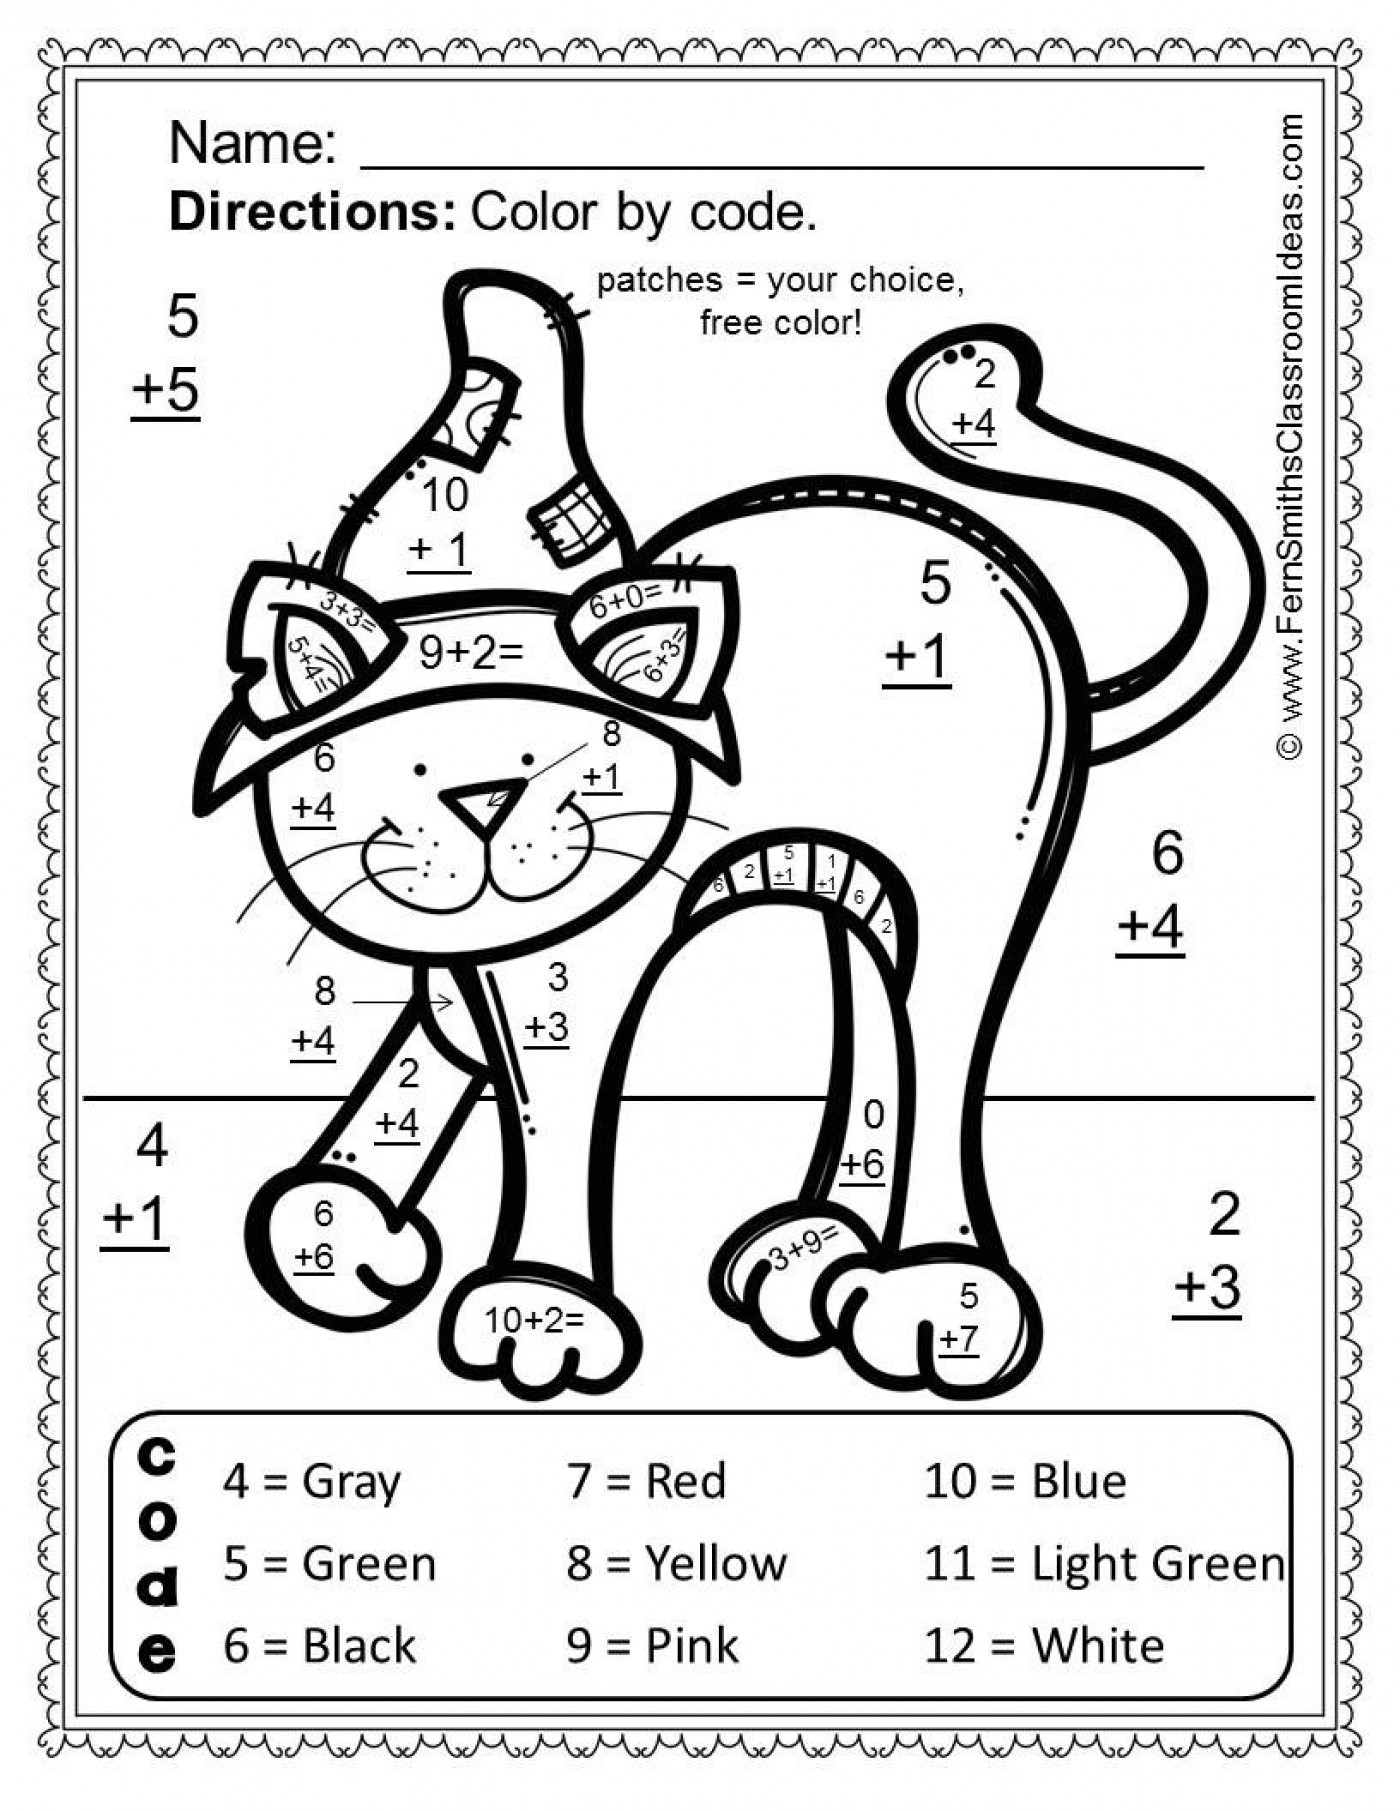 Free Math Worksheets Second Grade 2 Addition Add 2 Digit Numbers In Columns No Regrouping